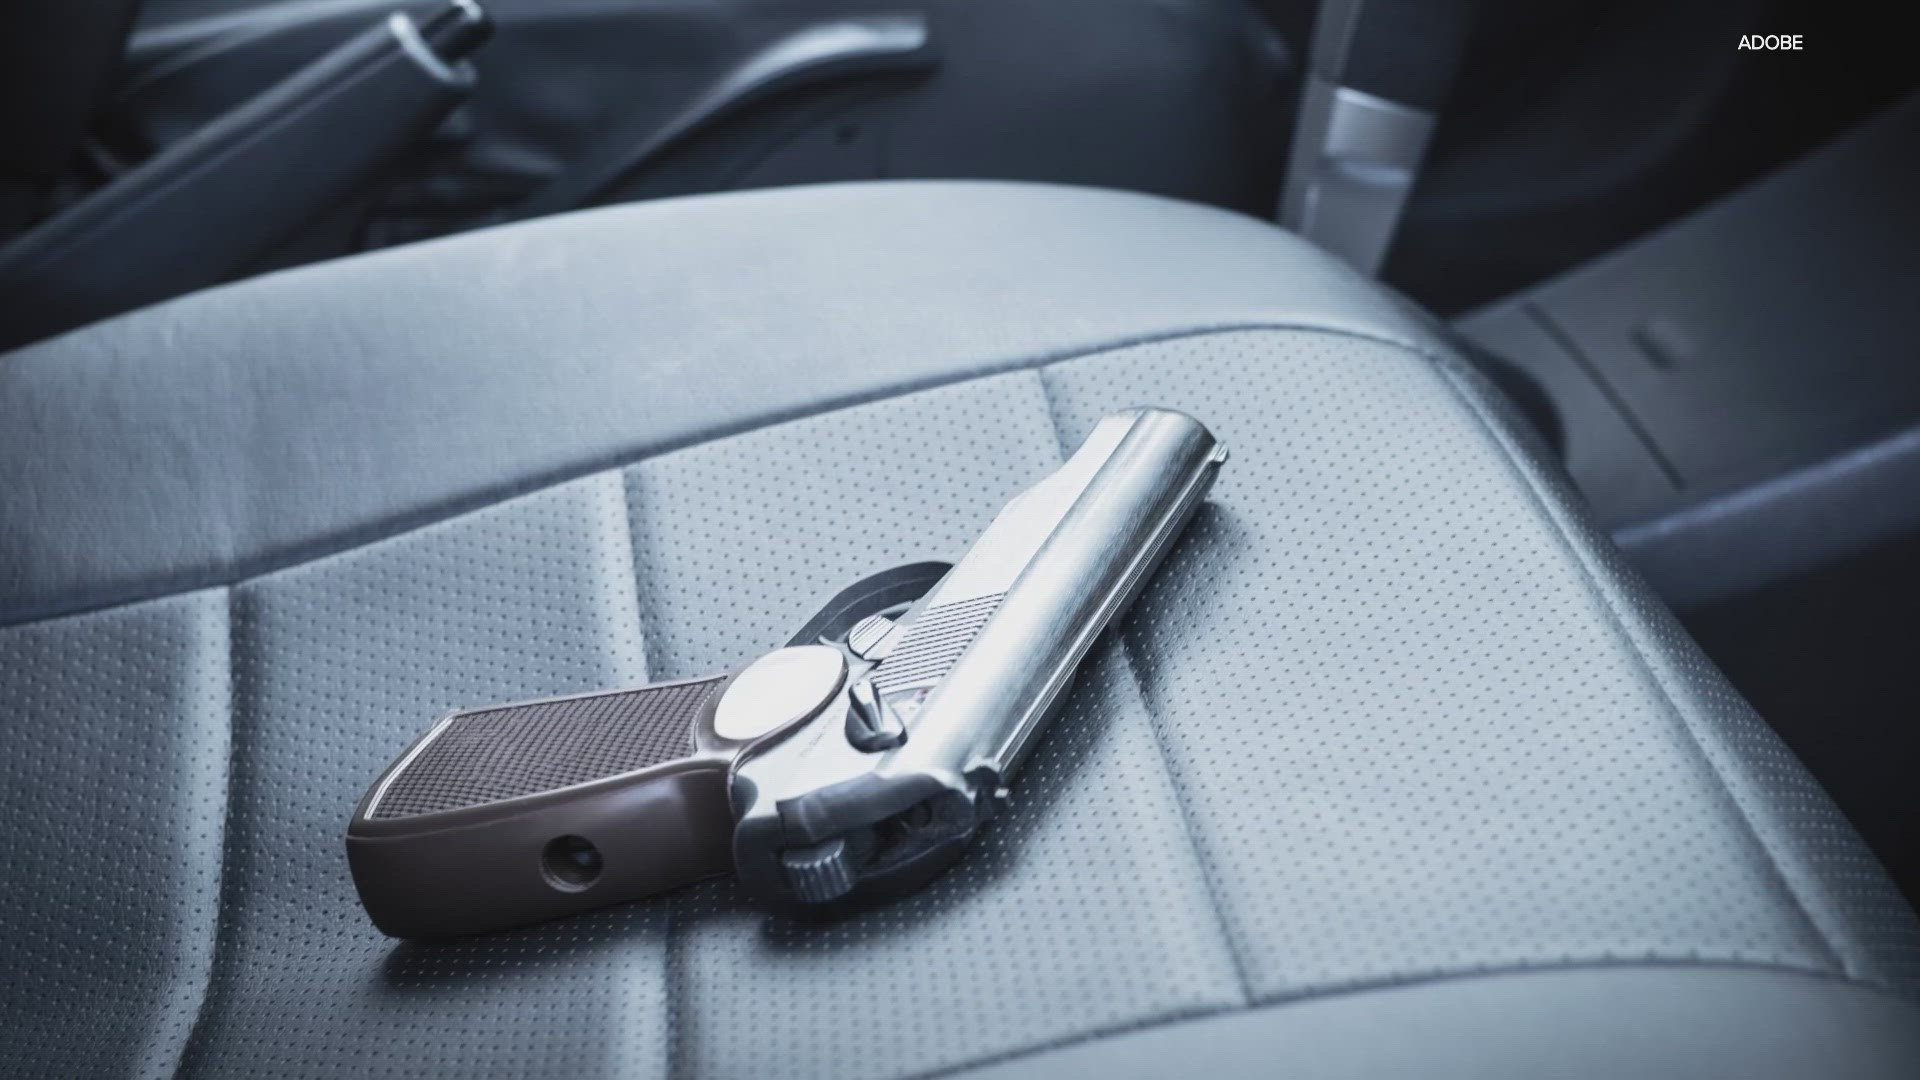 We're learning about a troubling trend. More guns are being stolen from cars across Indianapolis.